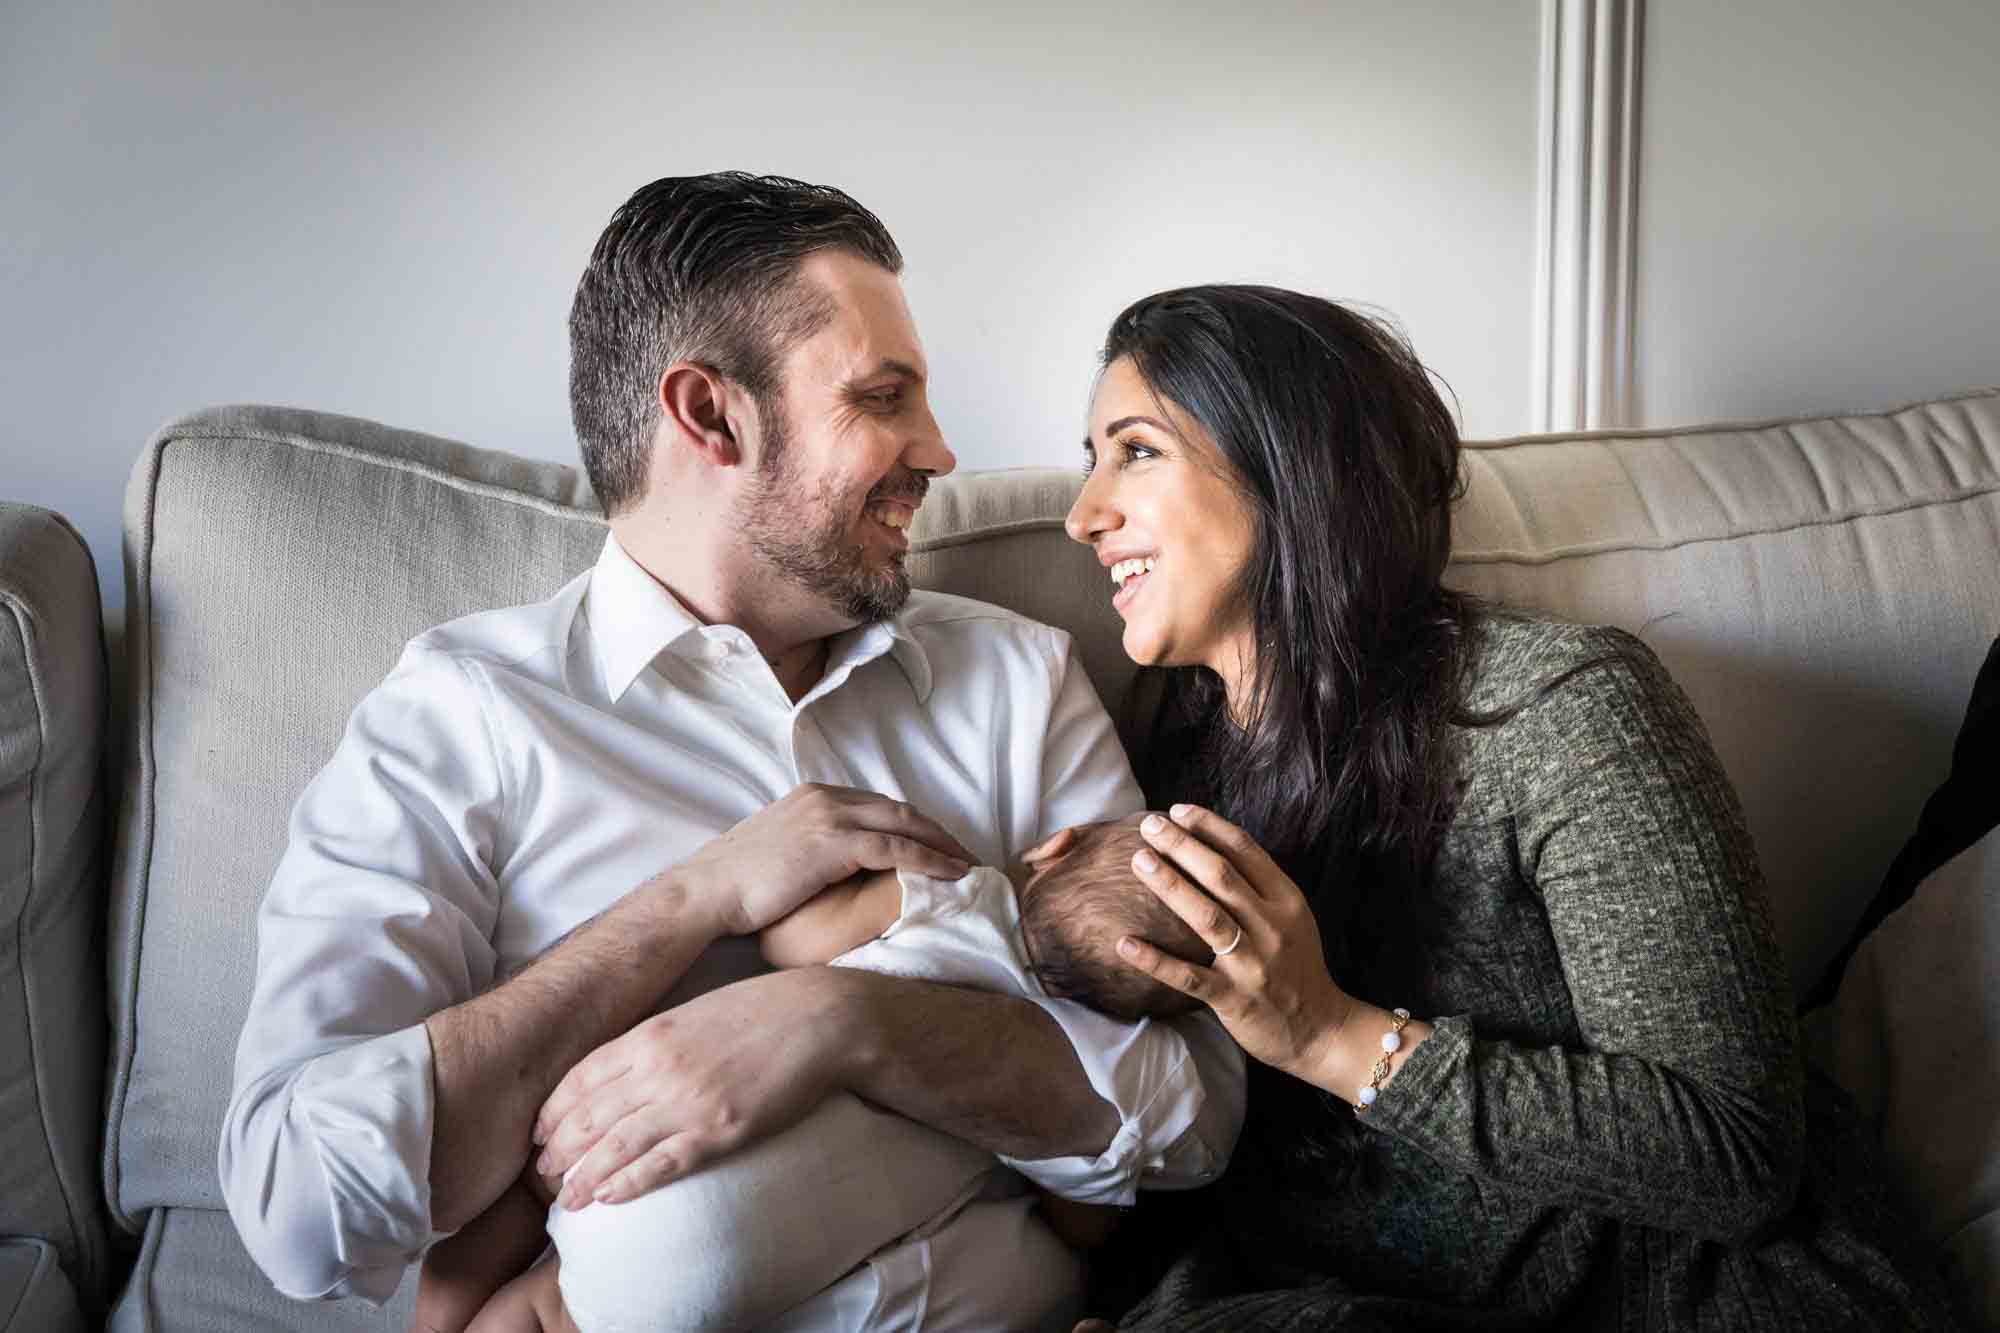 Manhattan family portrait session of parents holding baby on couch looking at each other